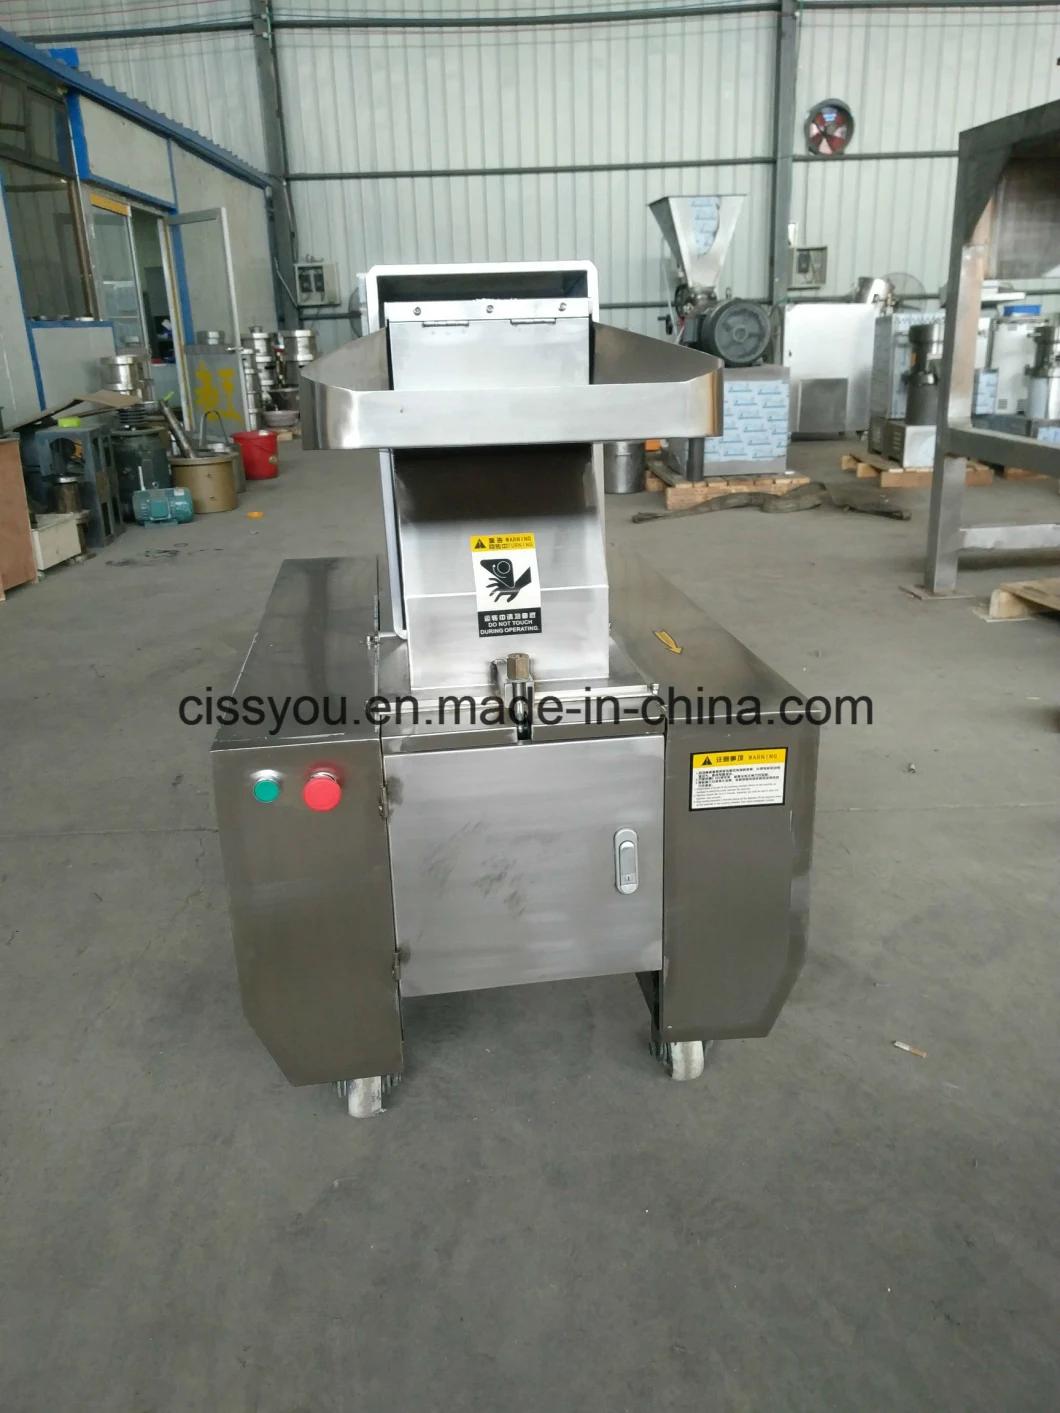 Stainless Steel China Poultry Animal Bone Crusher Grinder Machine